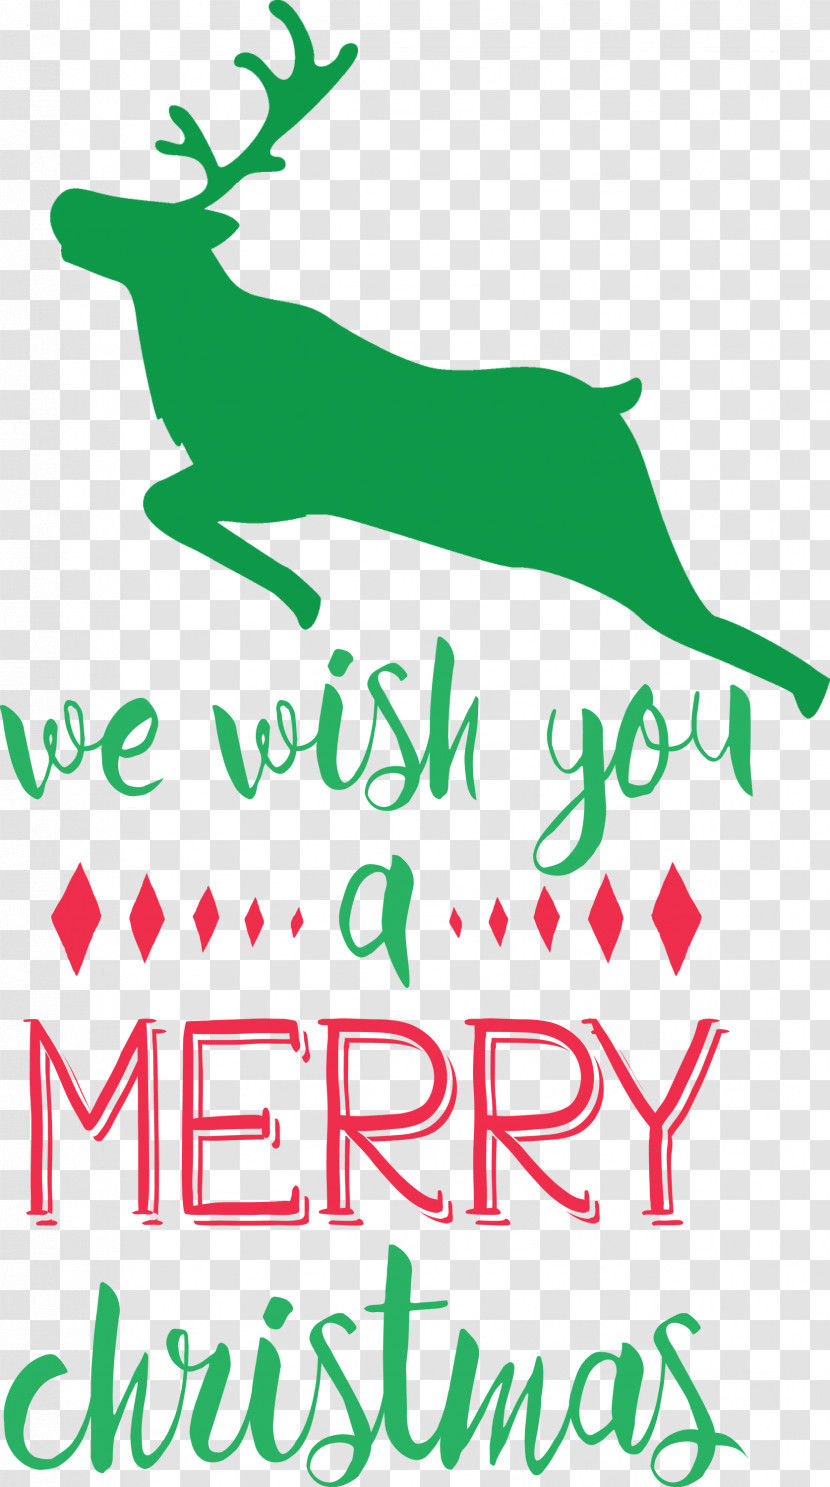 Merry Christmas Wish Transparent PNG